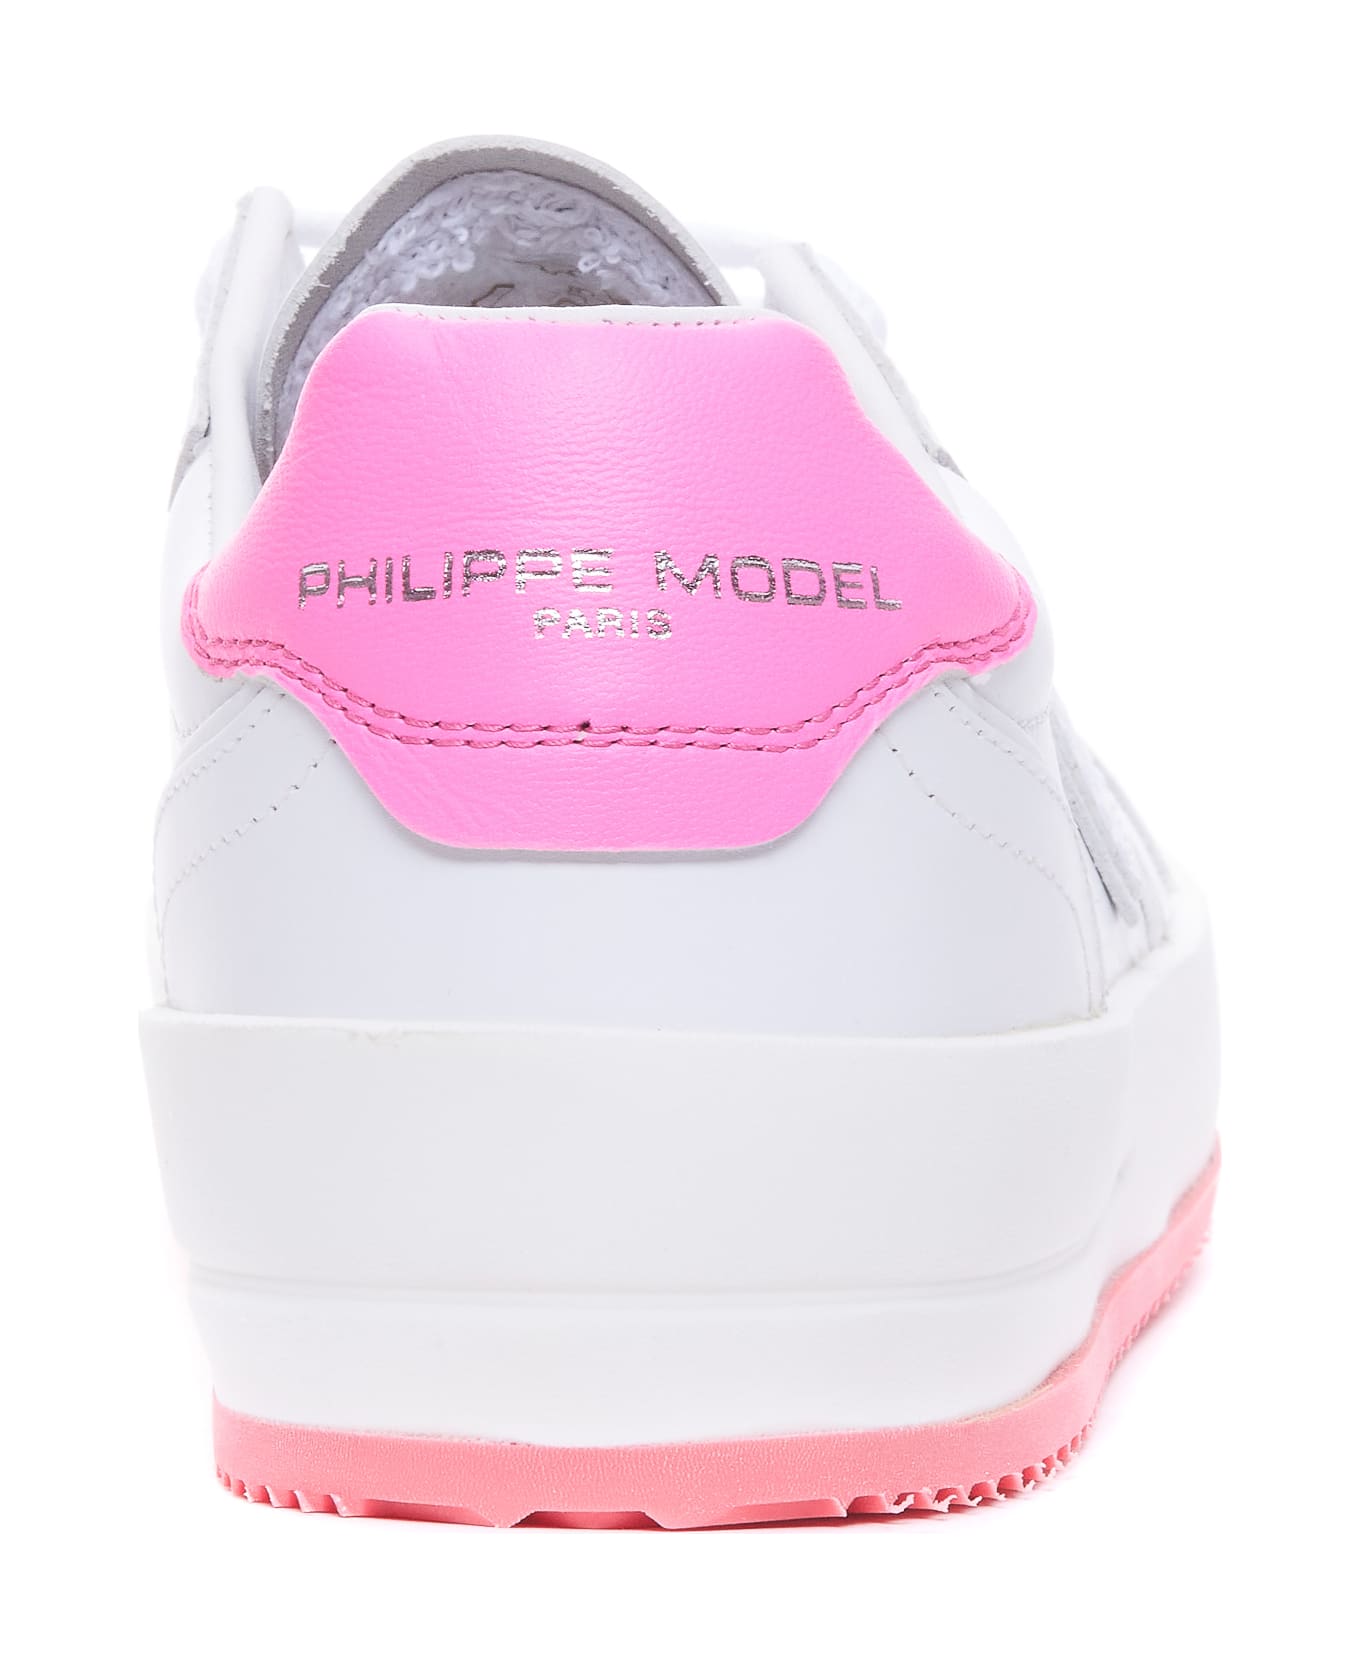 Philippe Model Nice Low Sneakers - Veau blanc/fucsia